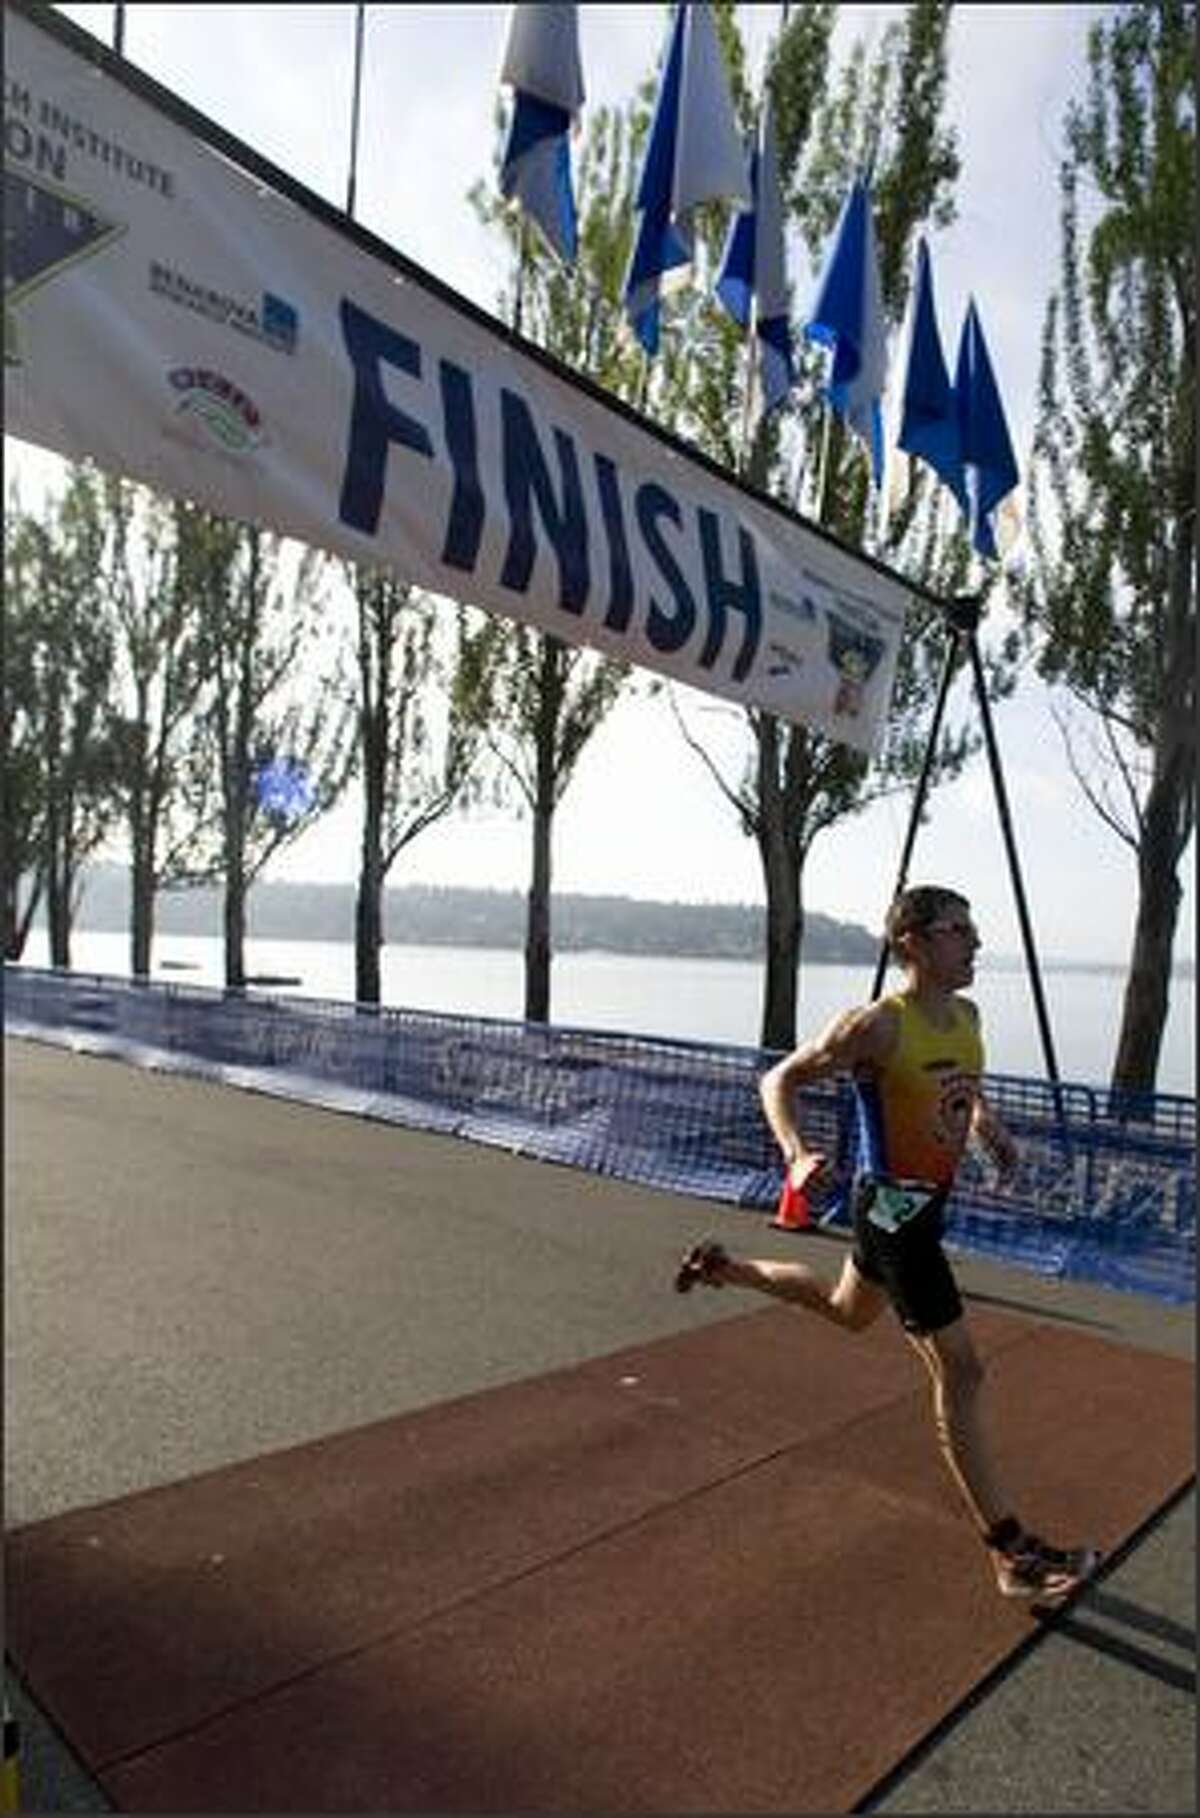 Chris Tremonte, of Redmond, crosses the finish line to place first with a time of 59.09 in the 2008 Benaroya Research Institute Triathlon.